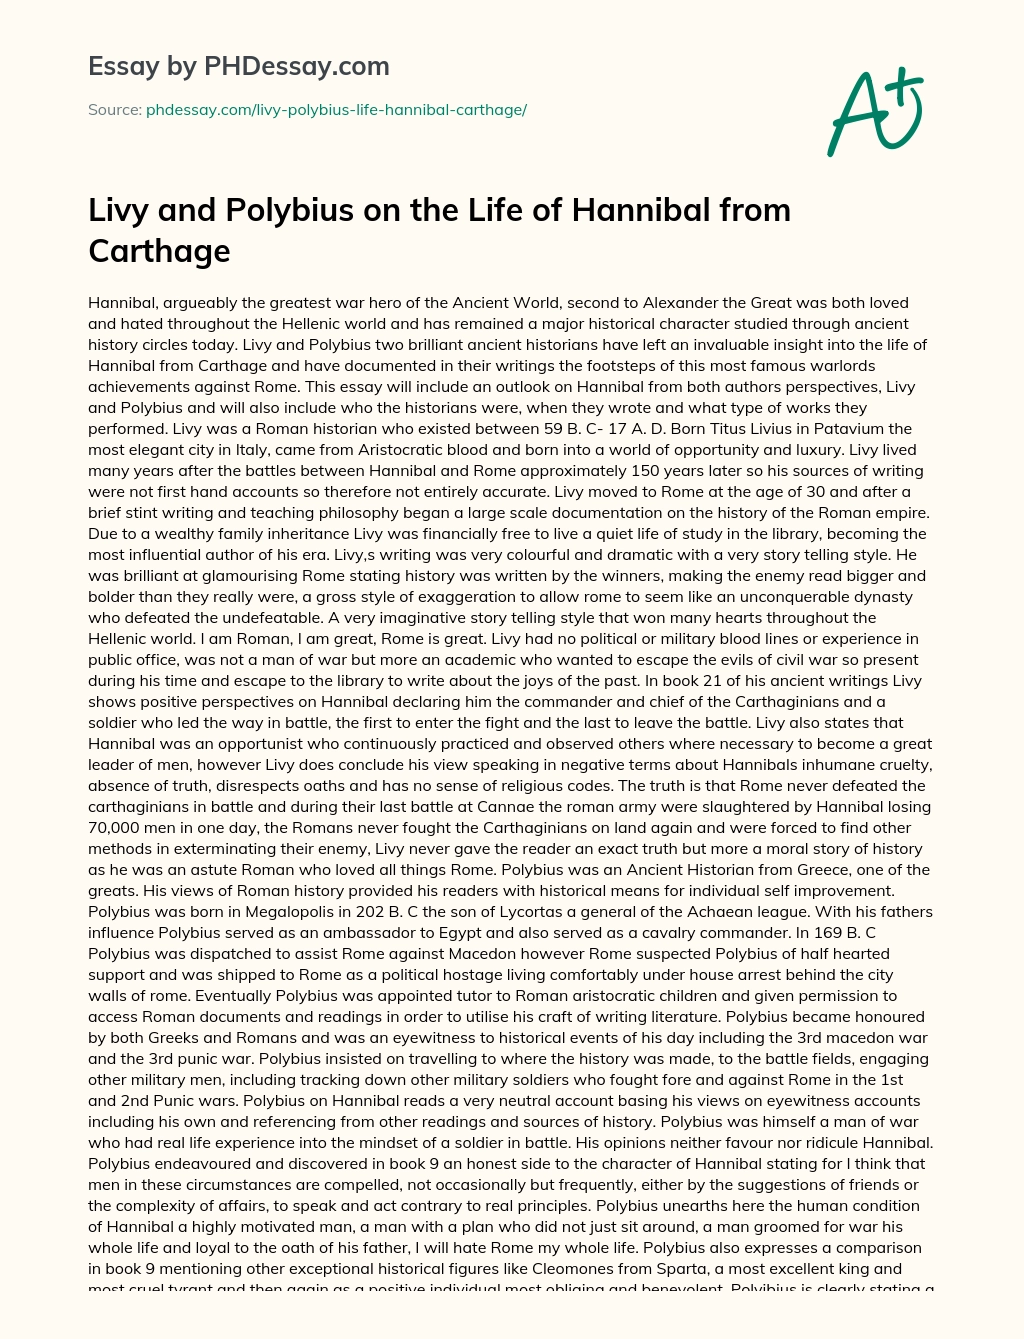 Livy and Polybius on the Life of Hannibal from Carthage essay